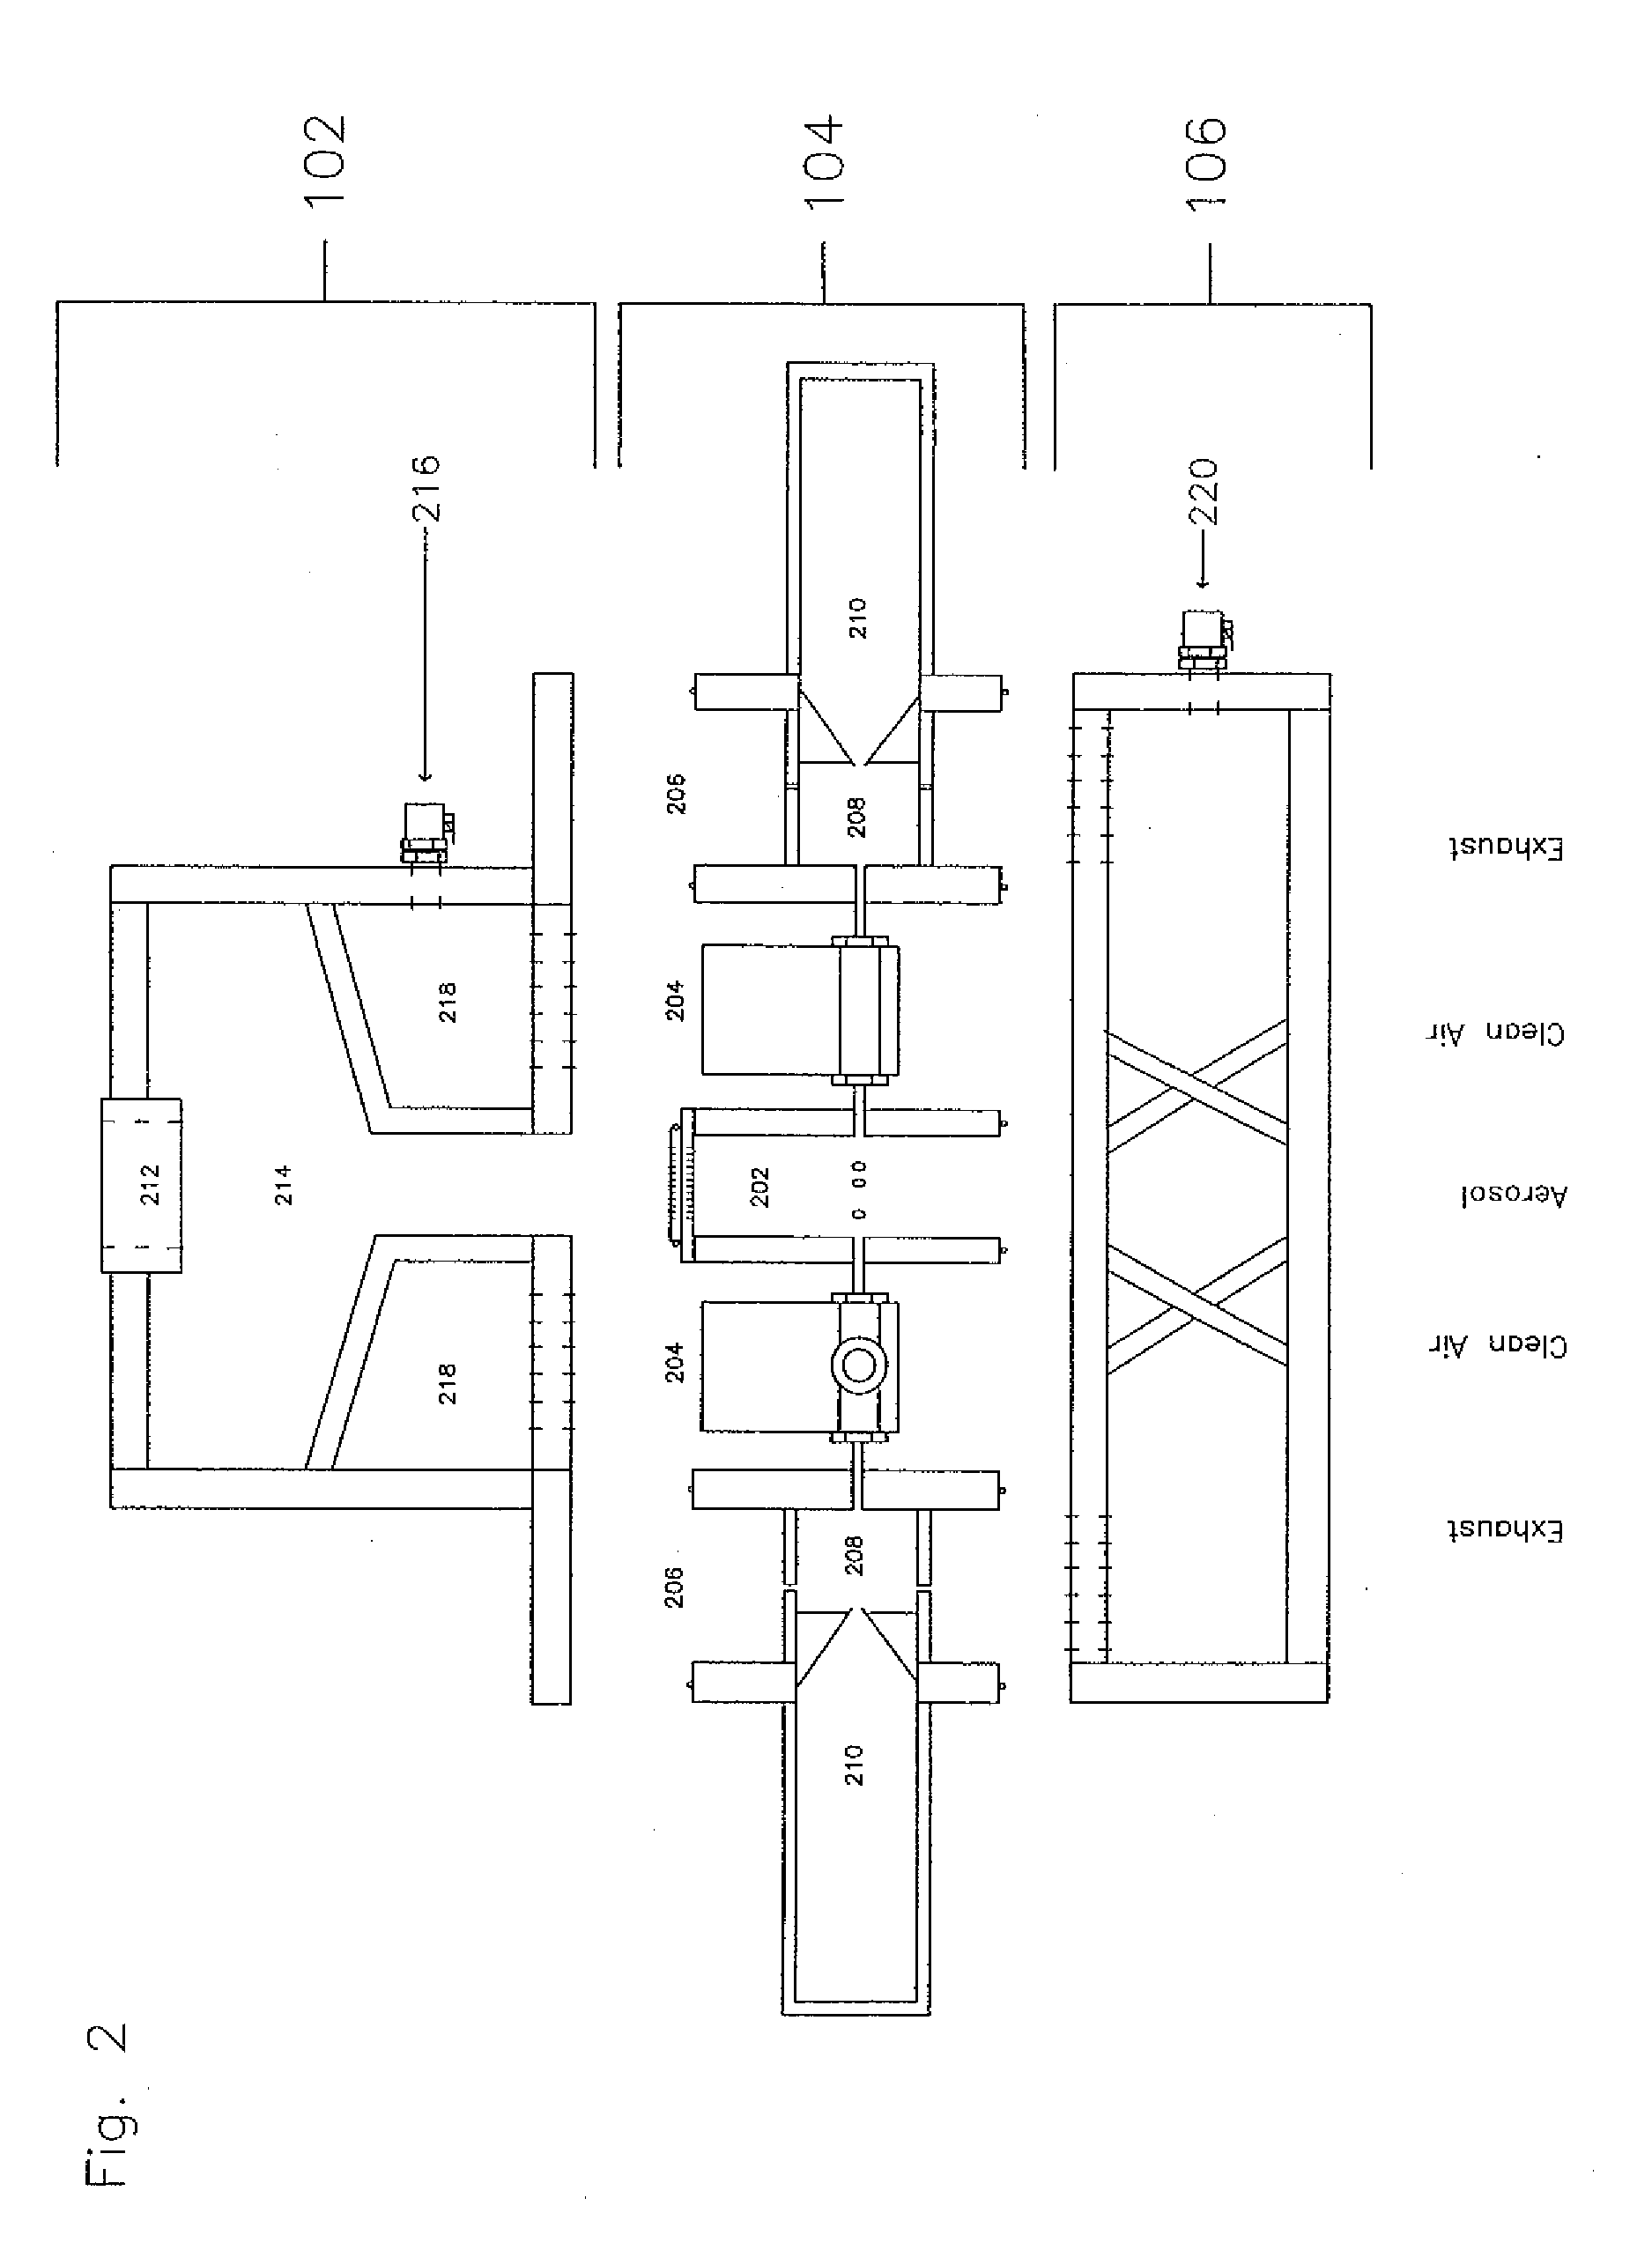 Automated Inhalation Toxicology Exposure System and Method